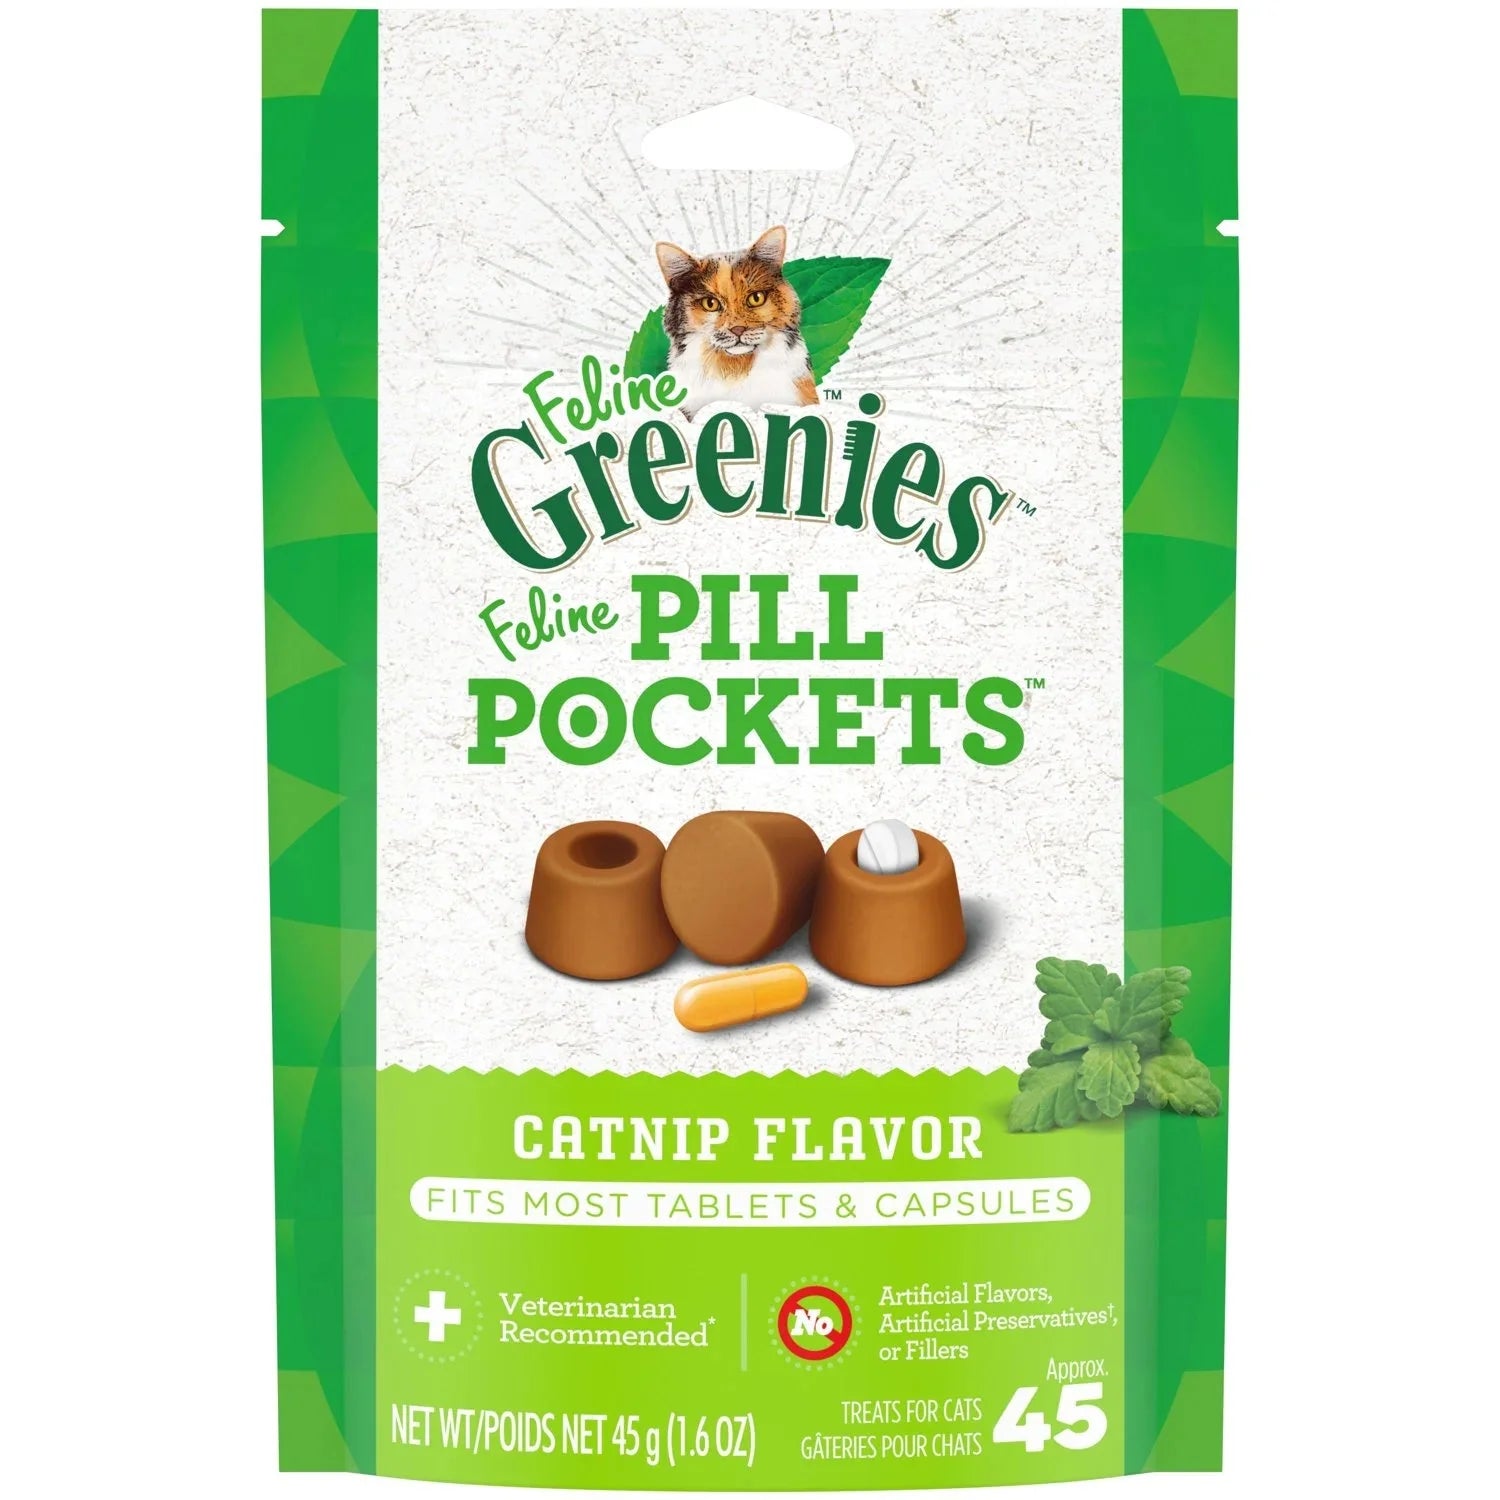 Wholesale prices with free shipping all over United States Greenies Feline Pill Pockets Catnip Flavor Cat Treats, 45 CT, 1.6 oz Pouch - Steven Deals